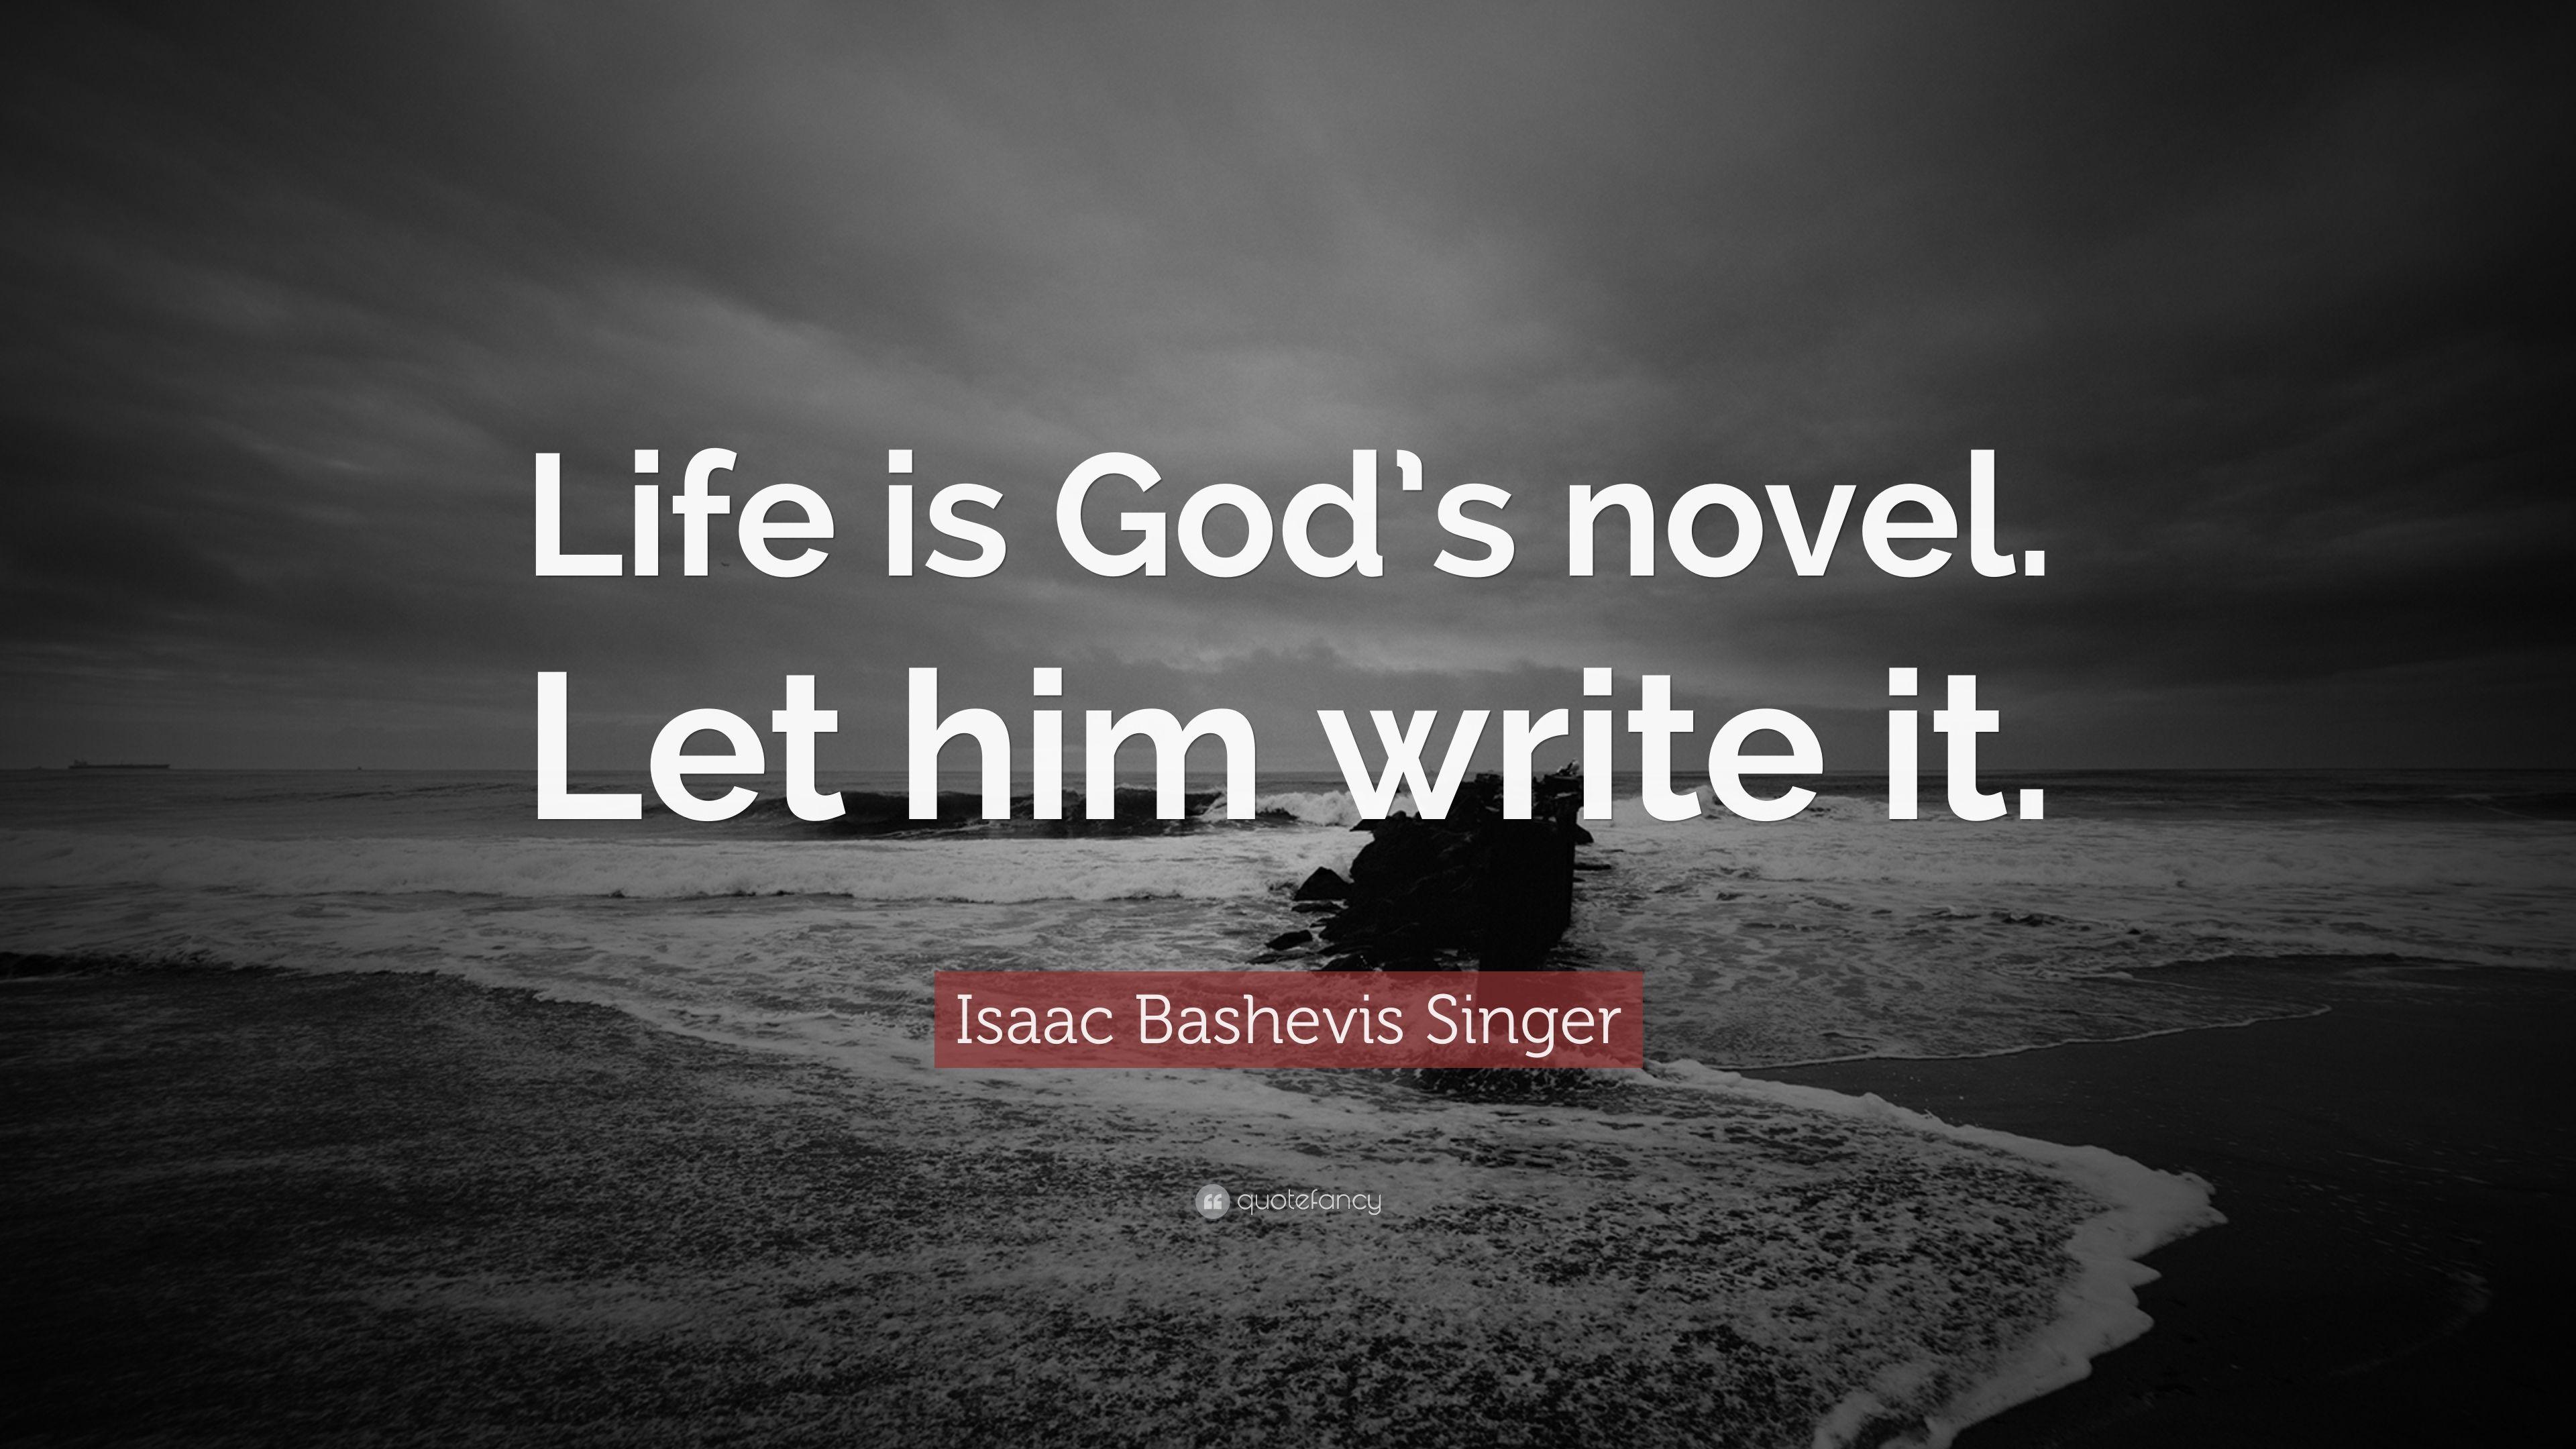 Isaac Bashevis Singer Quote: “Life is God's novel. Let him write it